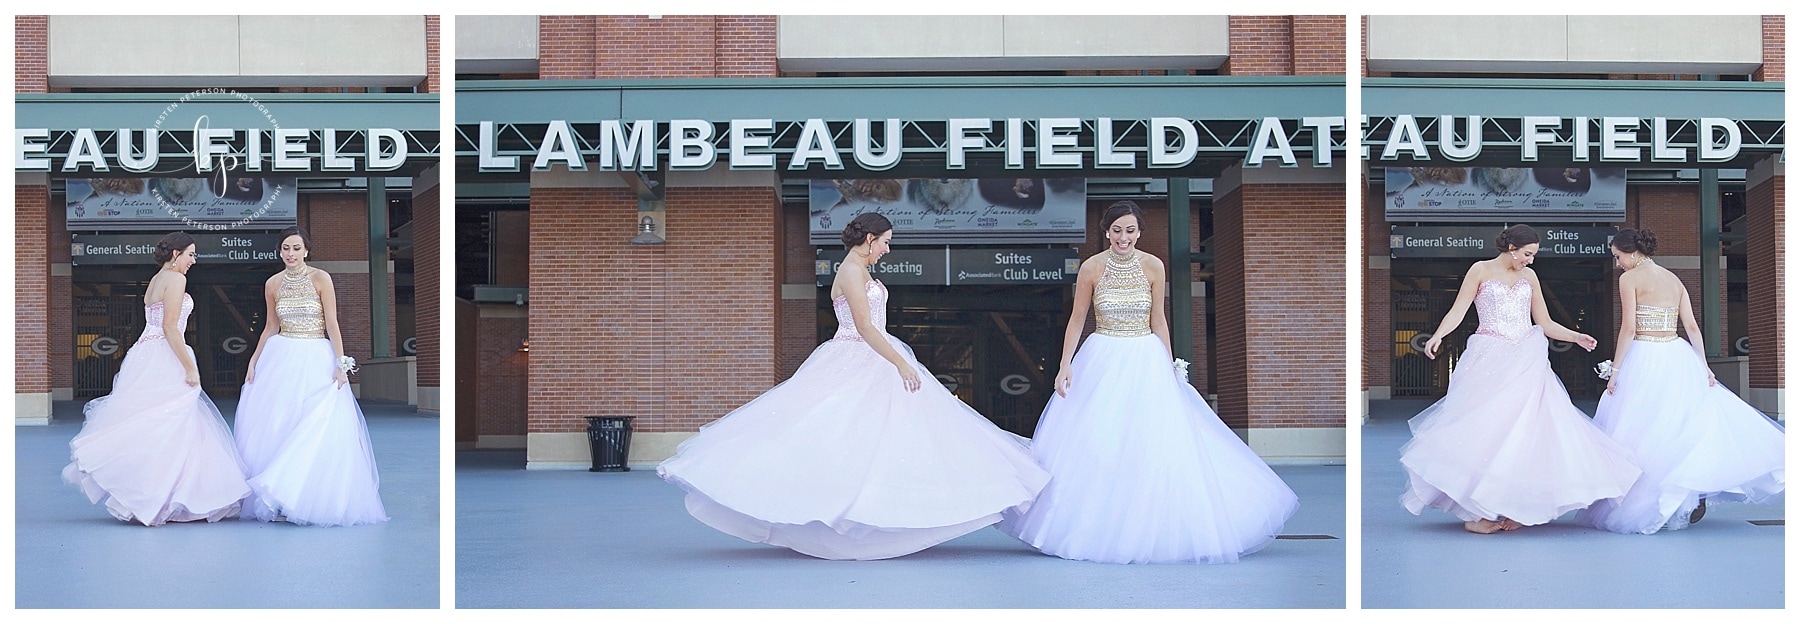 best friends twirling in prom dresses for prom pictures at lambeau field in green bay wisconsin